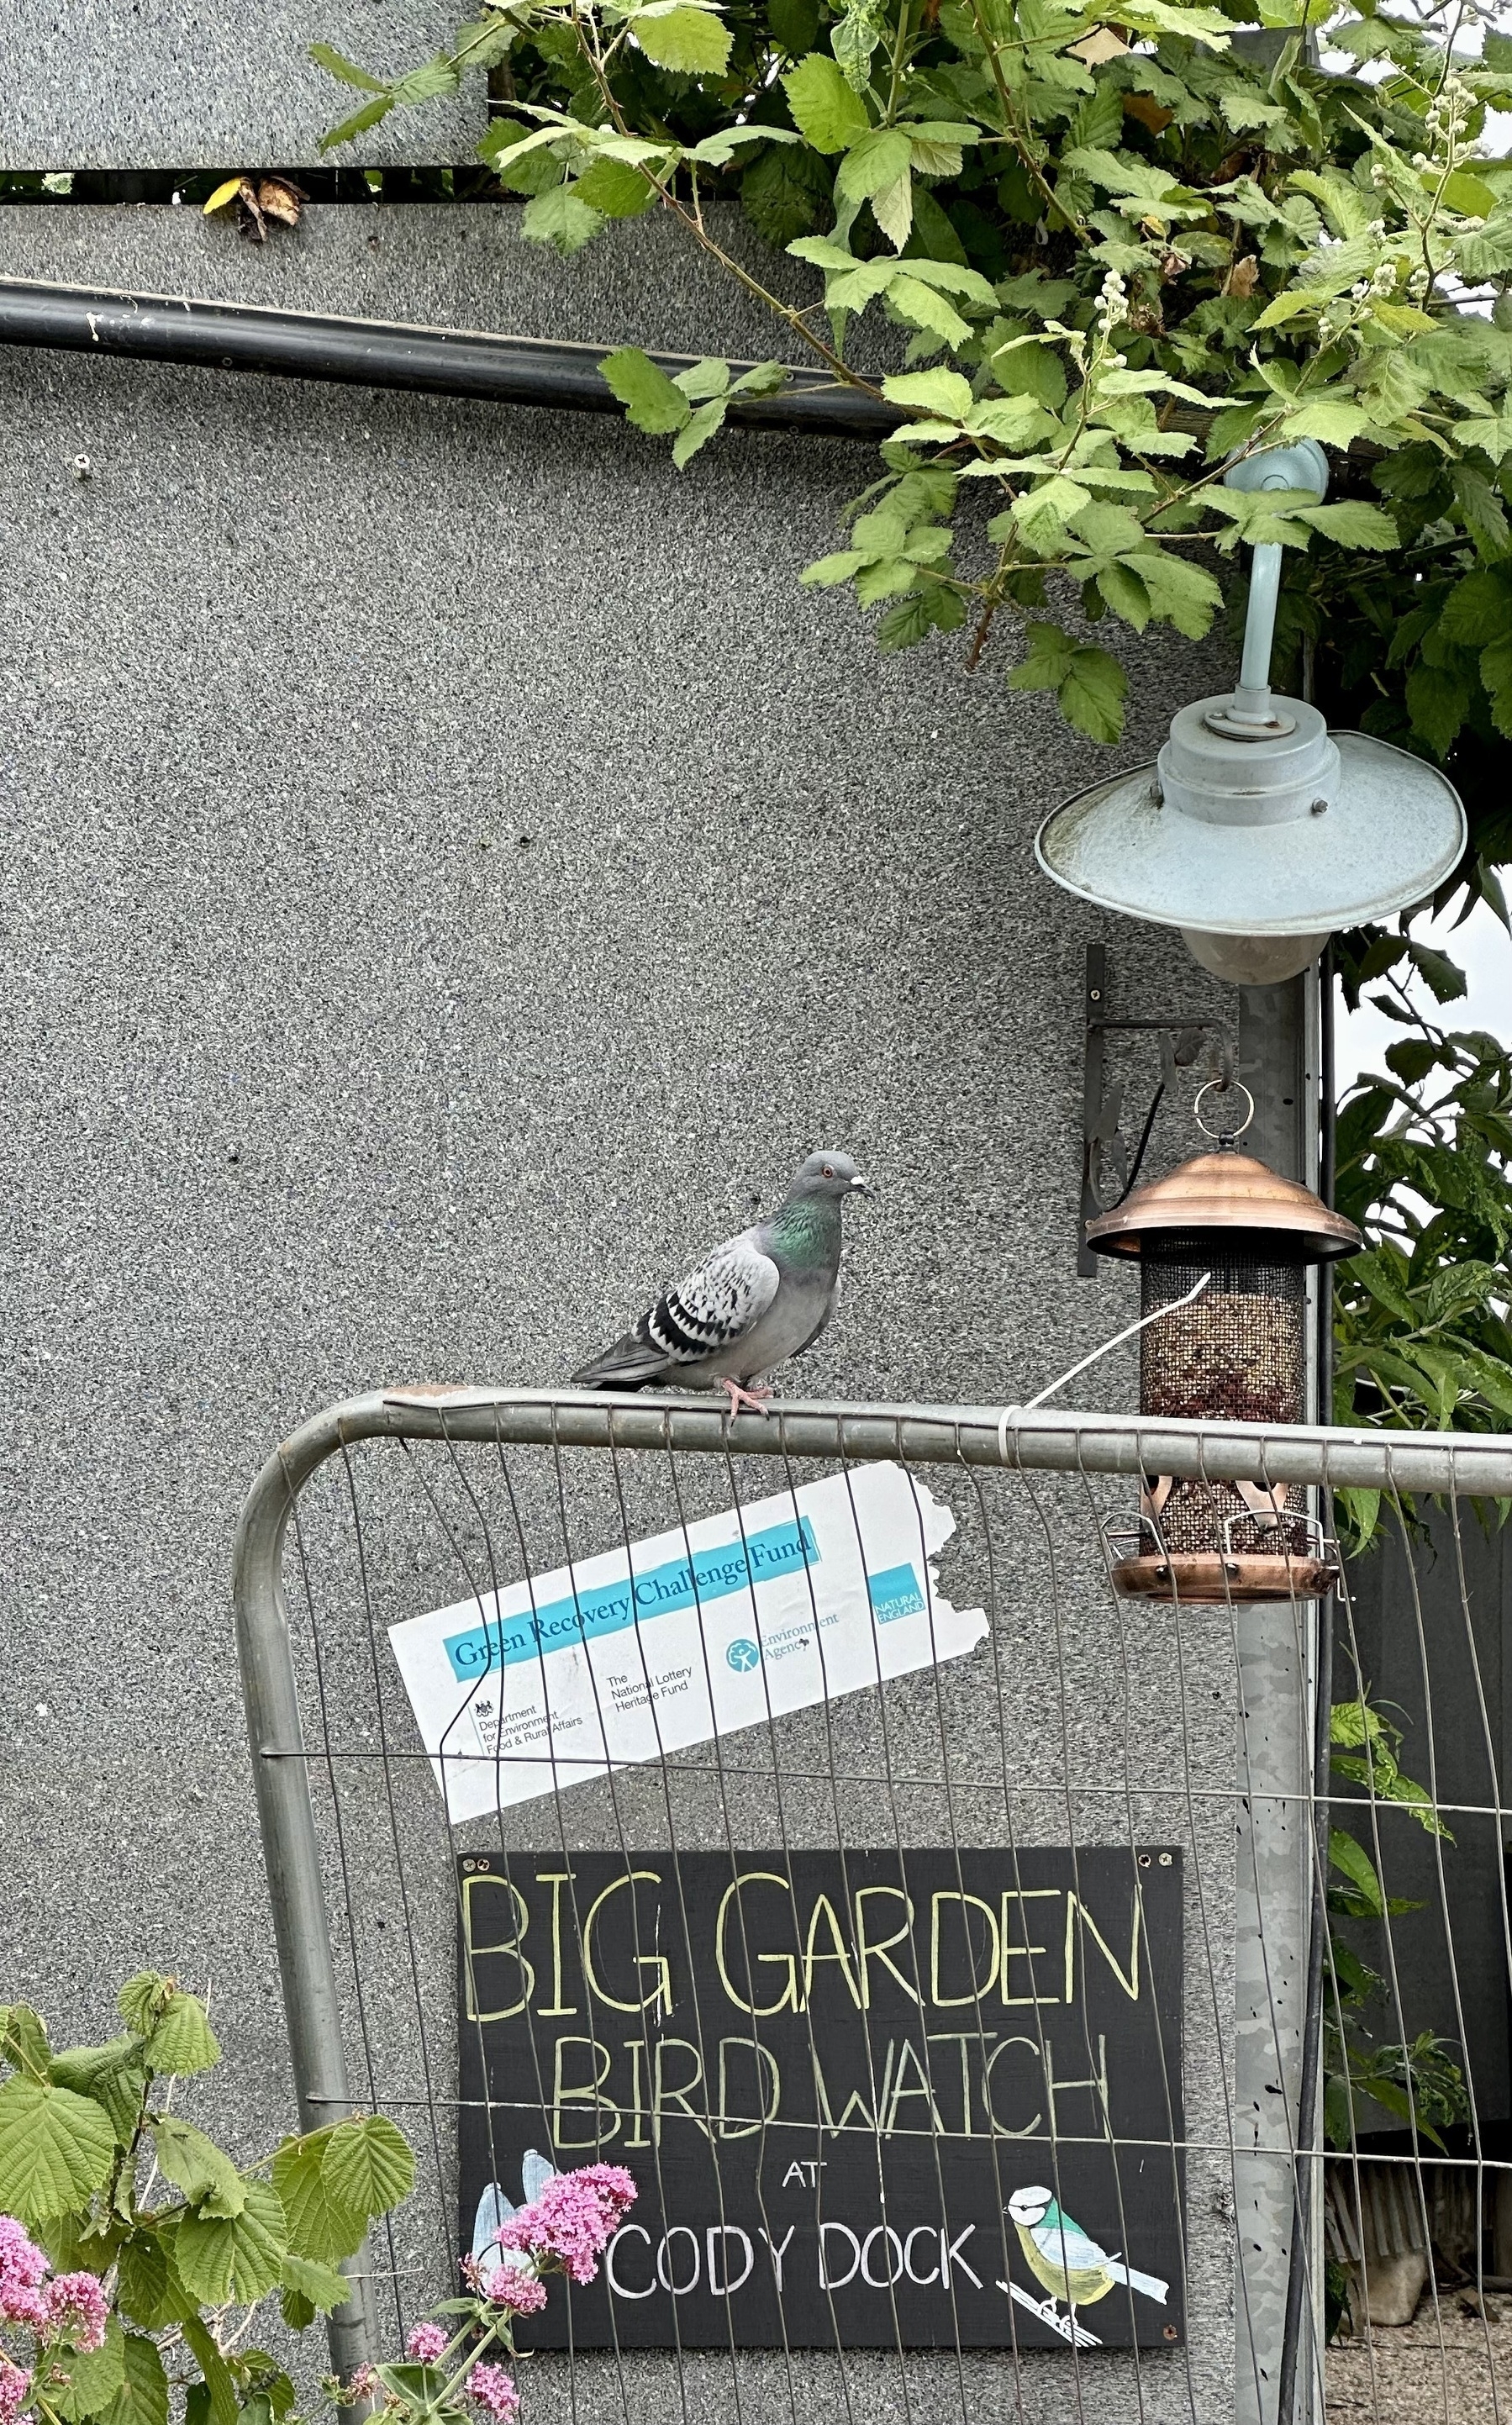 A pigeon perched on a metal fence above a sign that says Big Garden Bird Watch at Cody Dock.